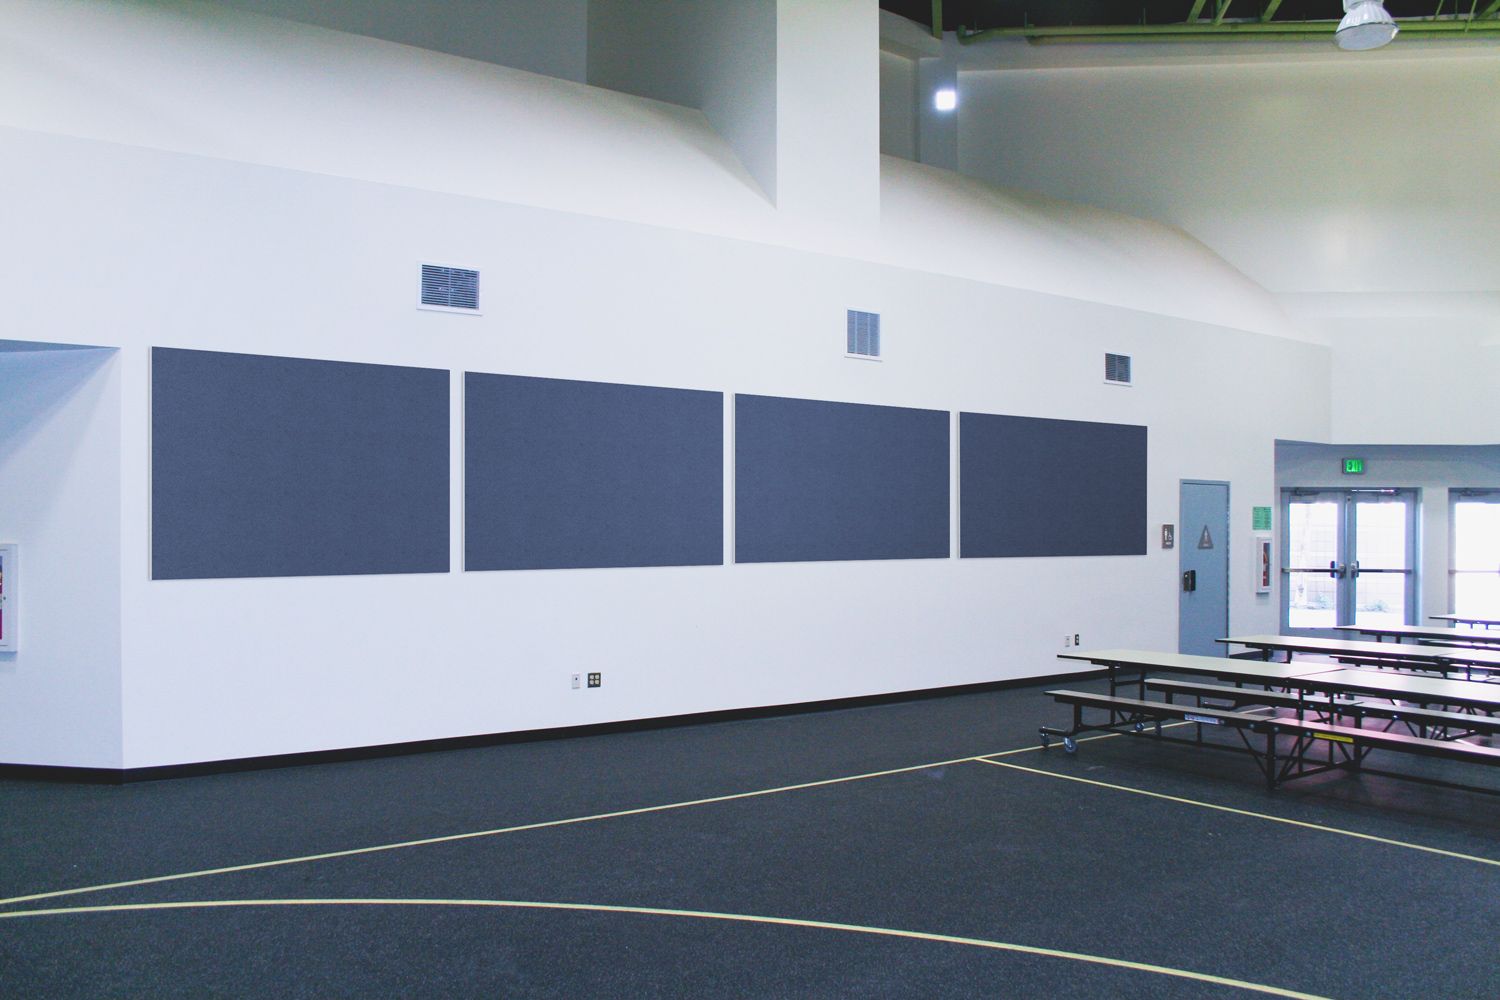 laminated panels in a gym